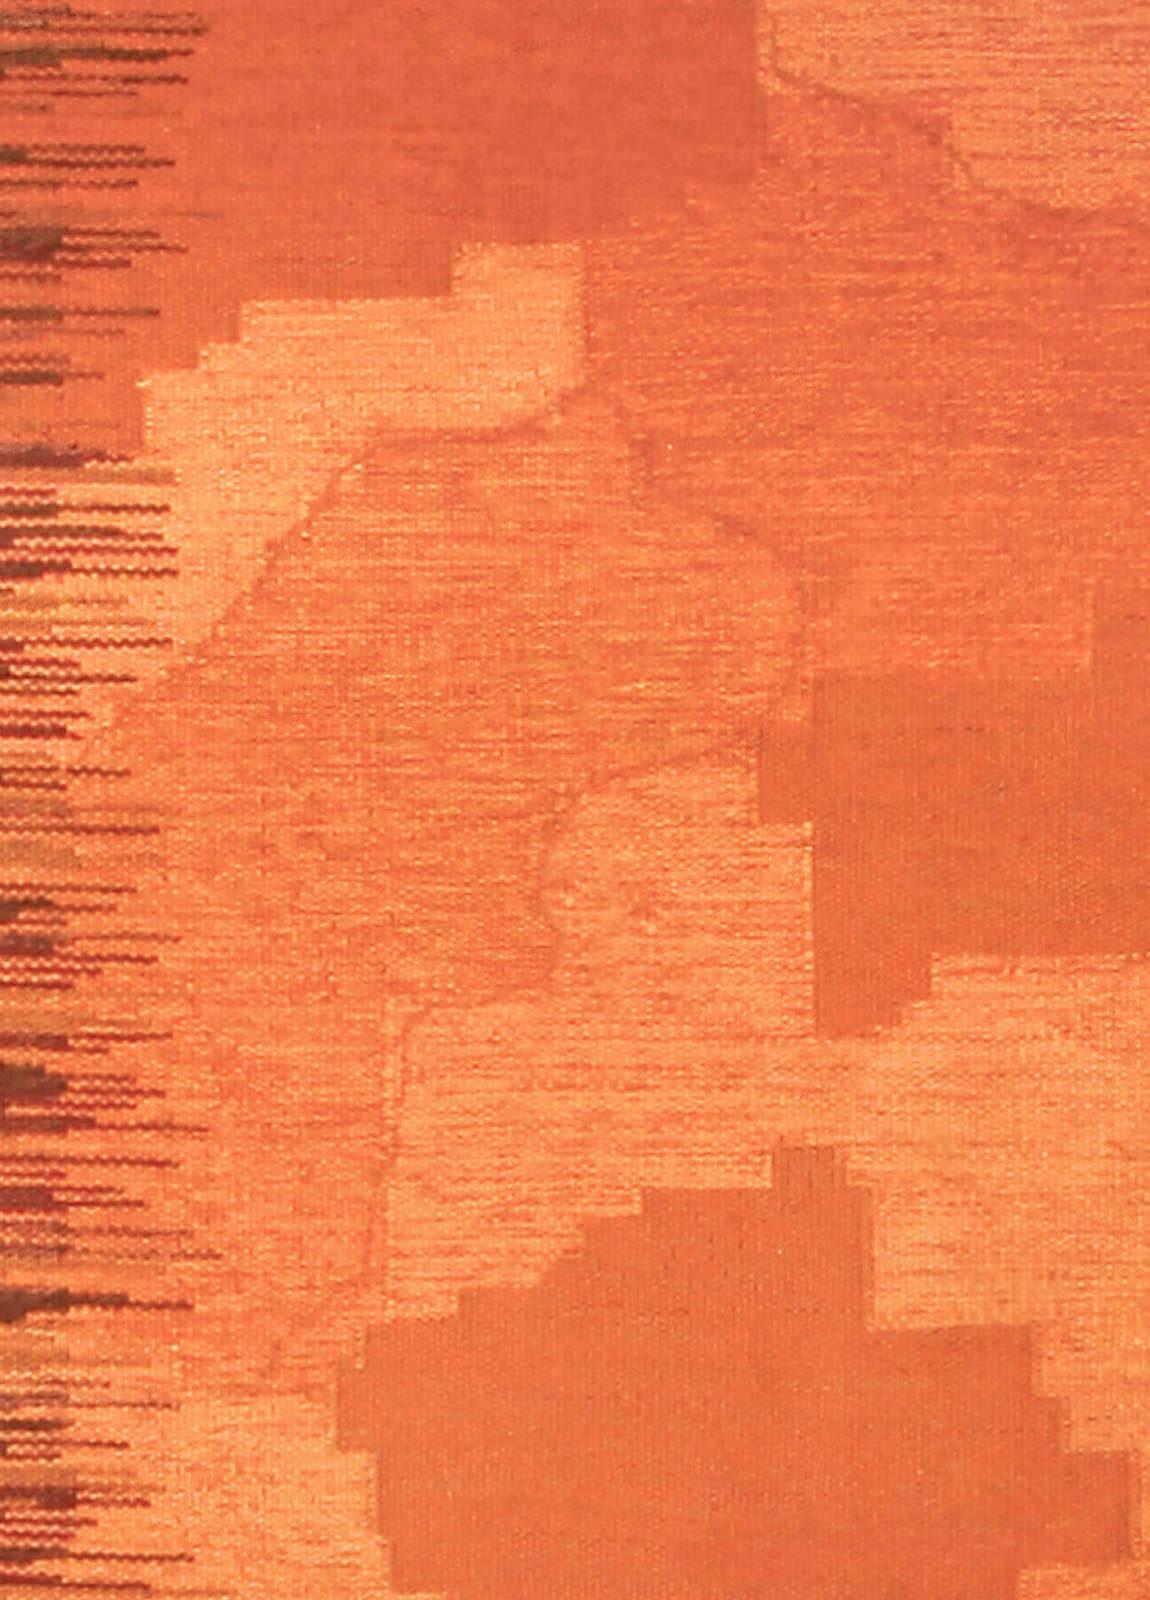 A Mid-Century Modern Finnish flat-weave rug woven with a contemporary camouflage pattern in various shades of red contrasted with an abstract linear design in tans and browns.